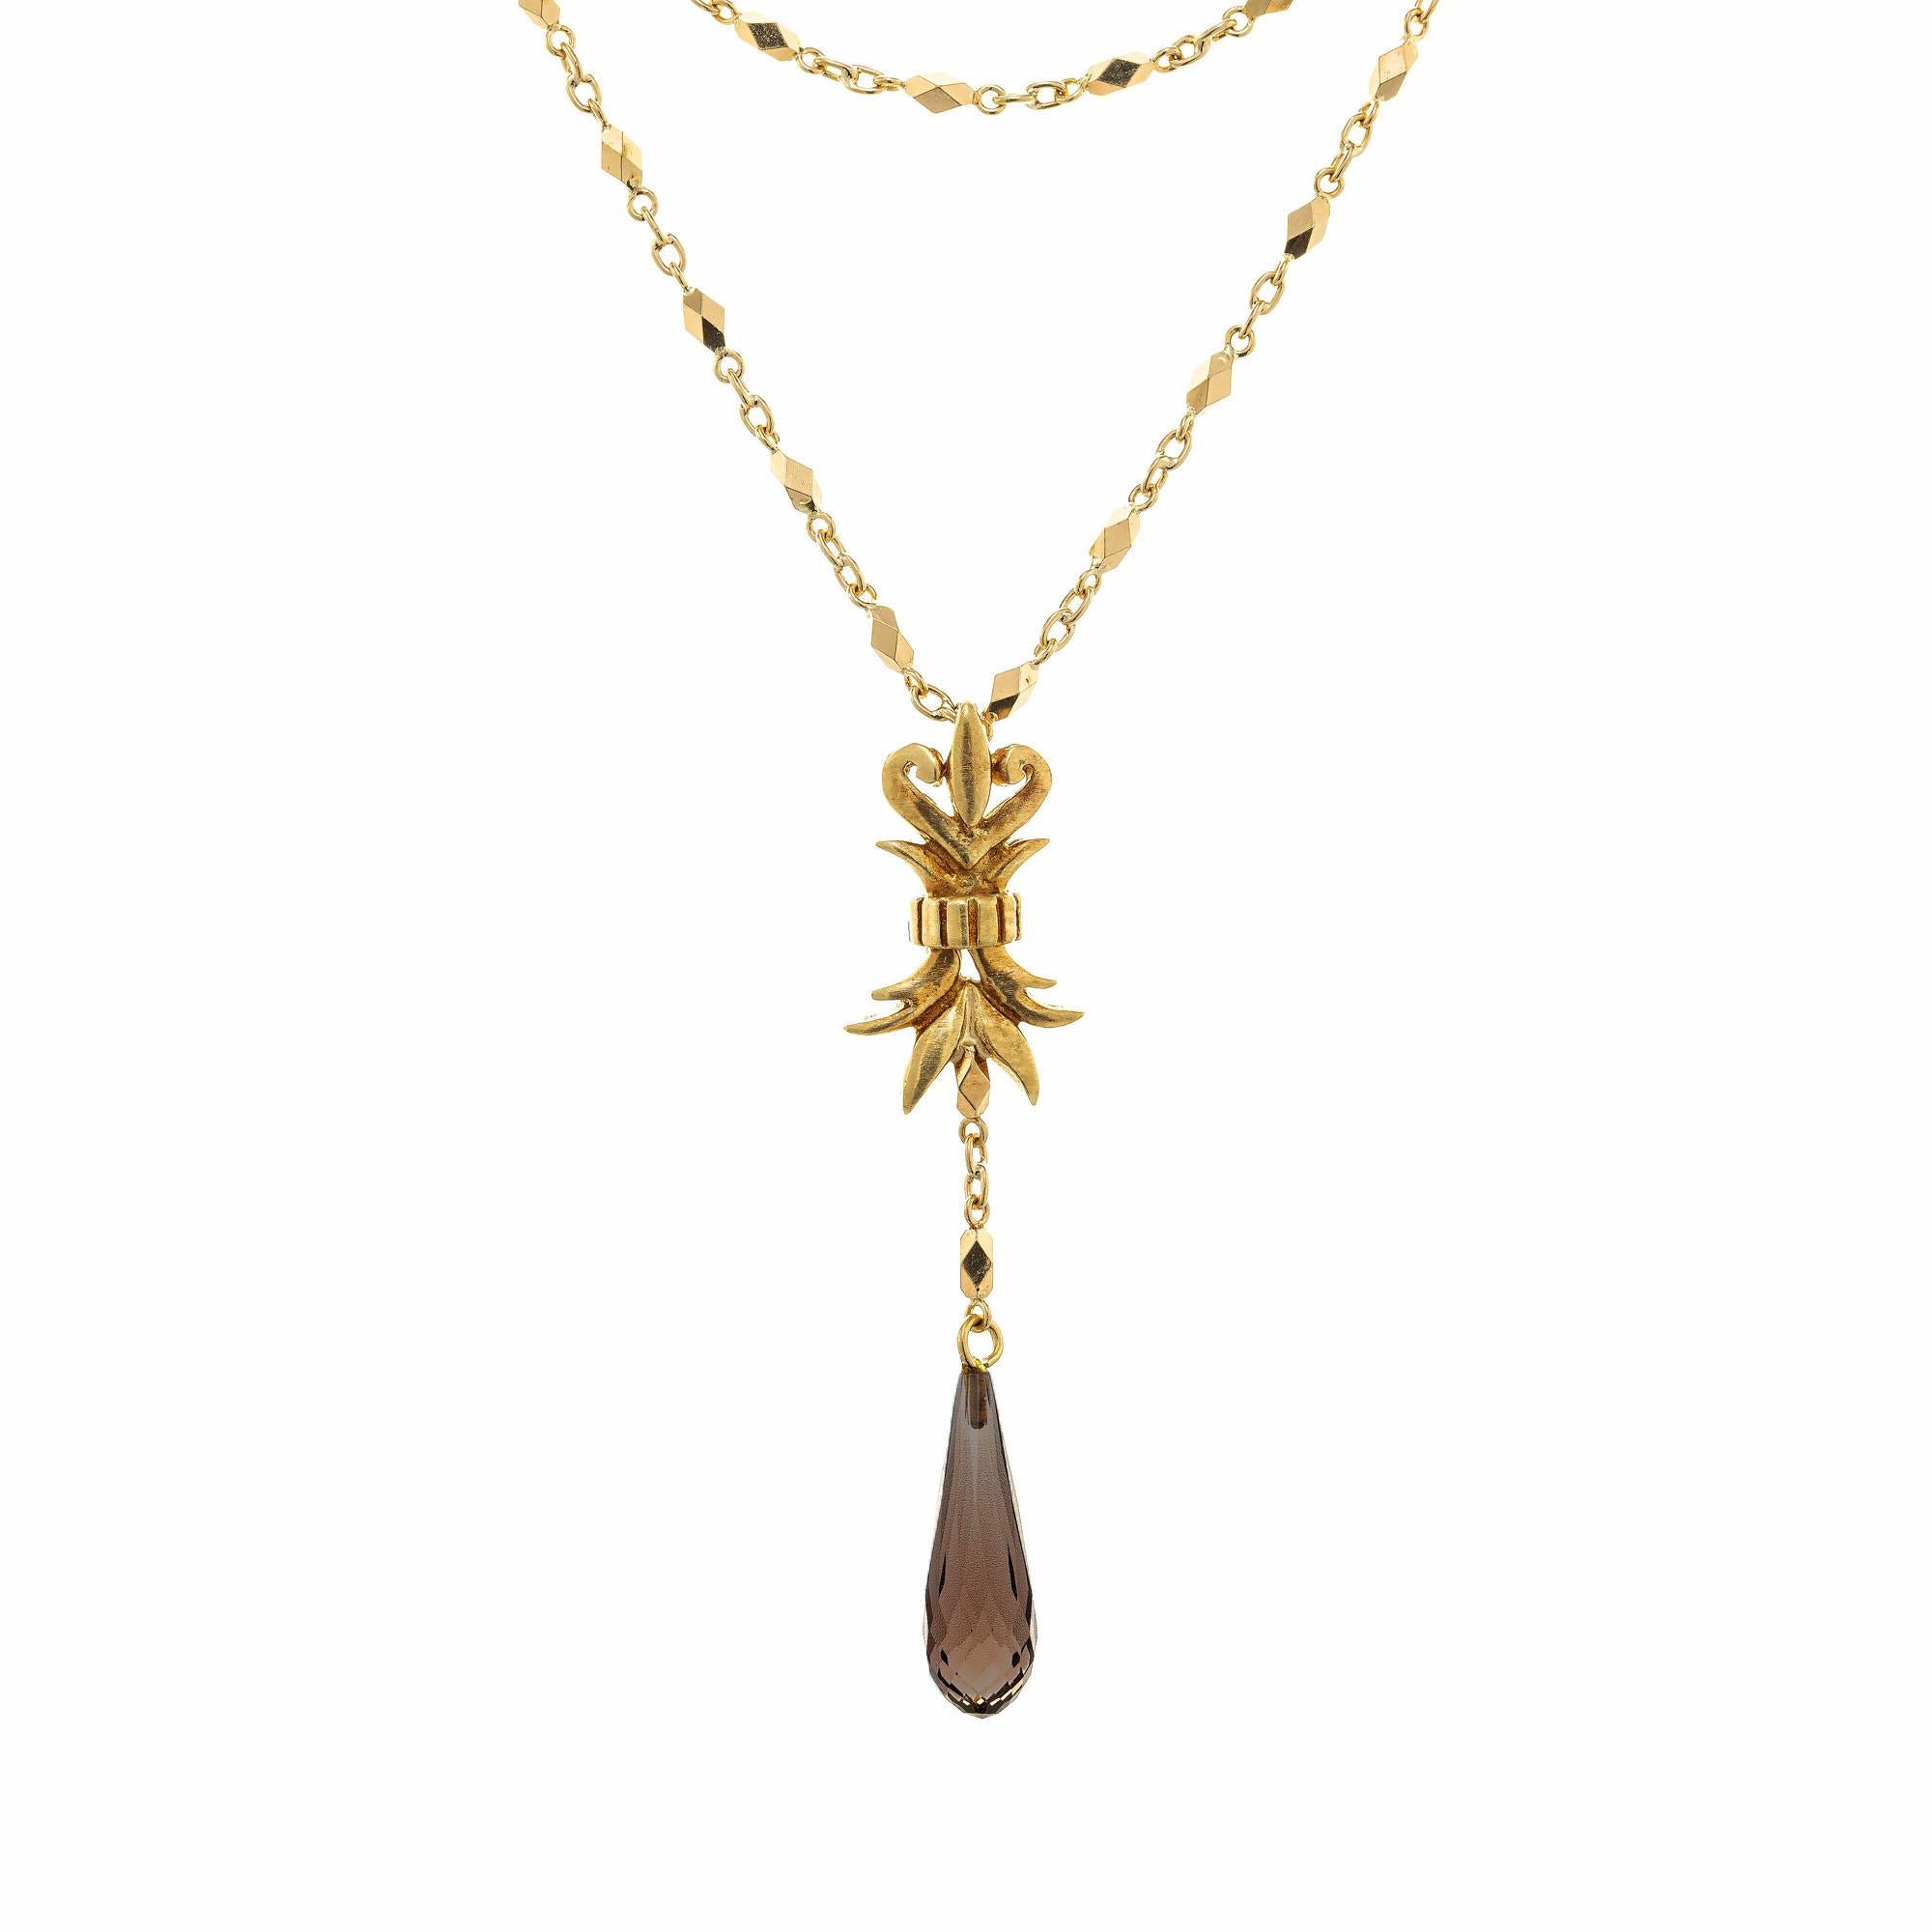 Robin Rotenier brown quartz pendant necklace. Multi 18k yellow gold chain with a smoky quartz briolette dangle drop. 17.5 inches in length.  

1 brown smoky quartz briolette, VS
18k yellow gold 
Stamped: 18k 750
Hallmark: RR
13.8 grams
Top to